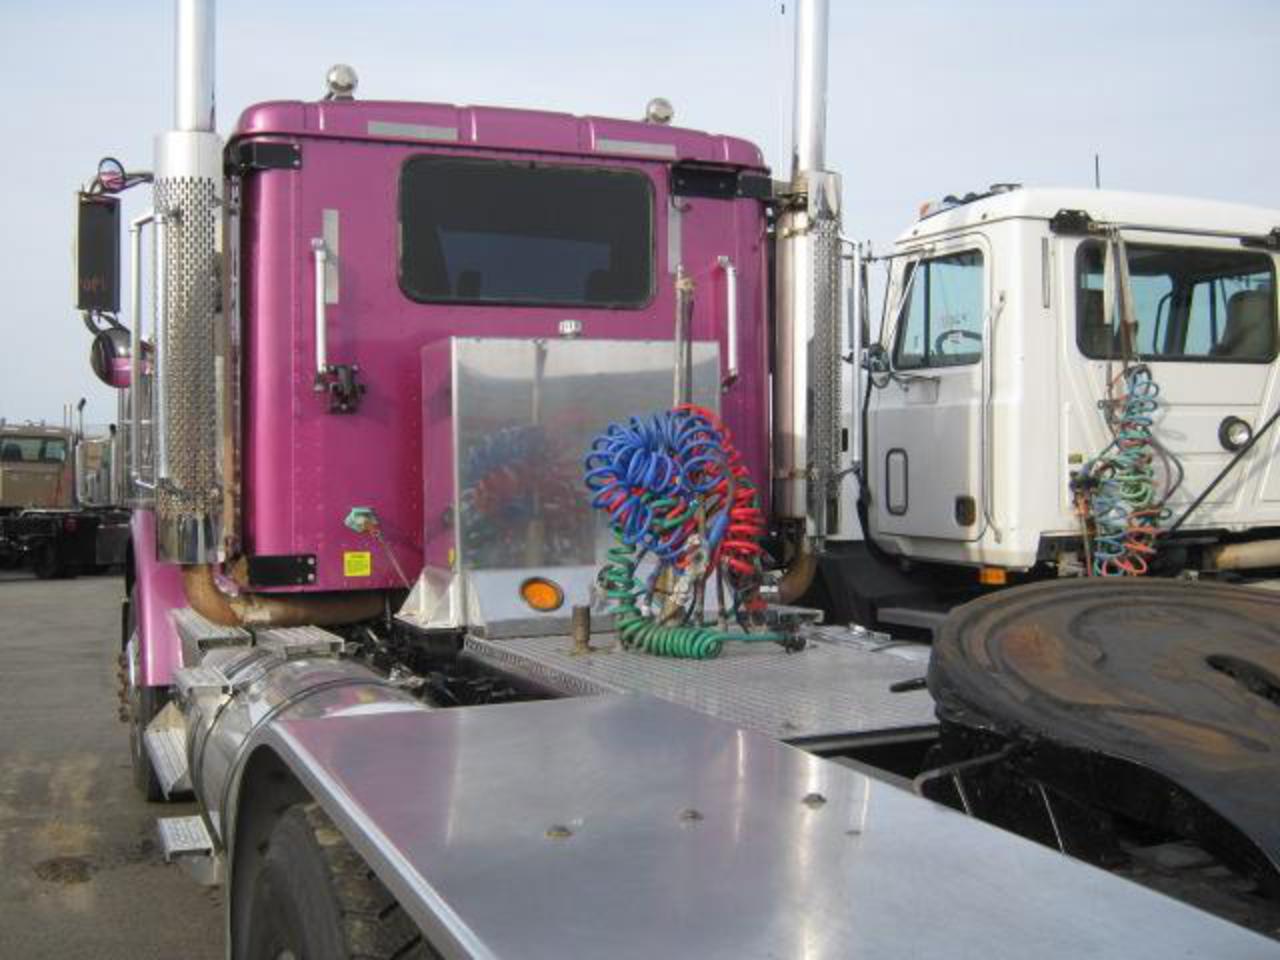 INTERNATIONAL 9900I EAGLE DAYCAB FOR SALE IN PA PENNSYLVANIA. 2007 ...